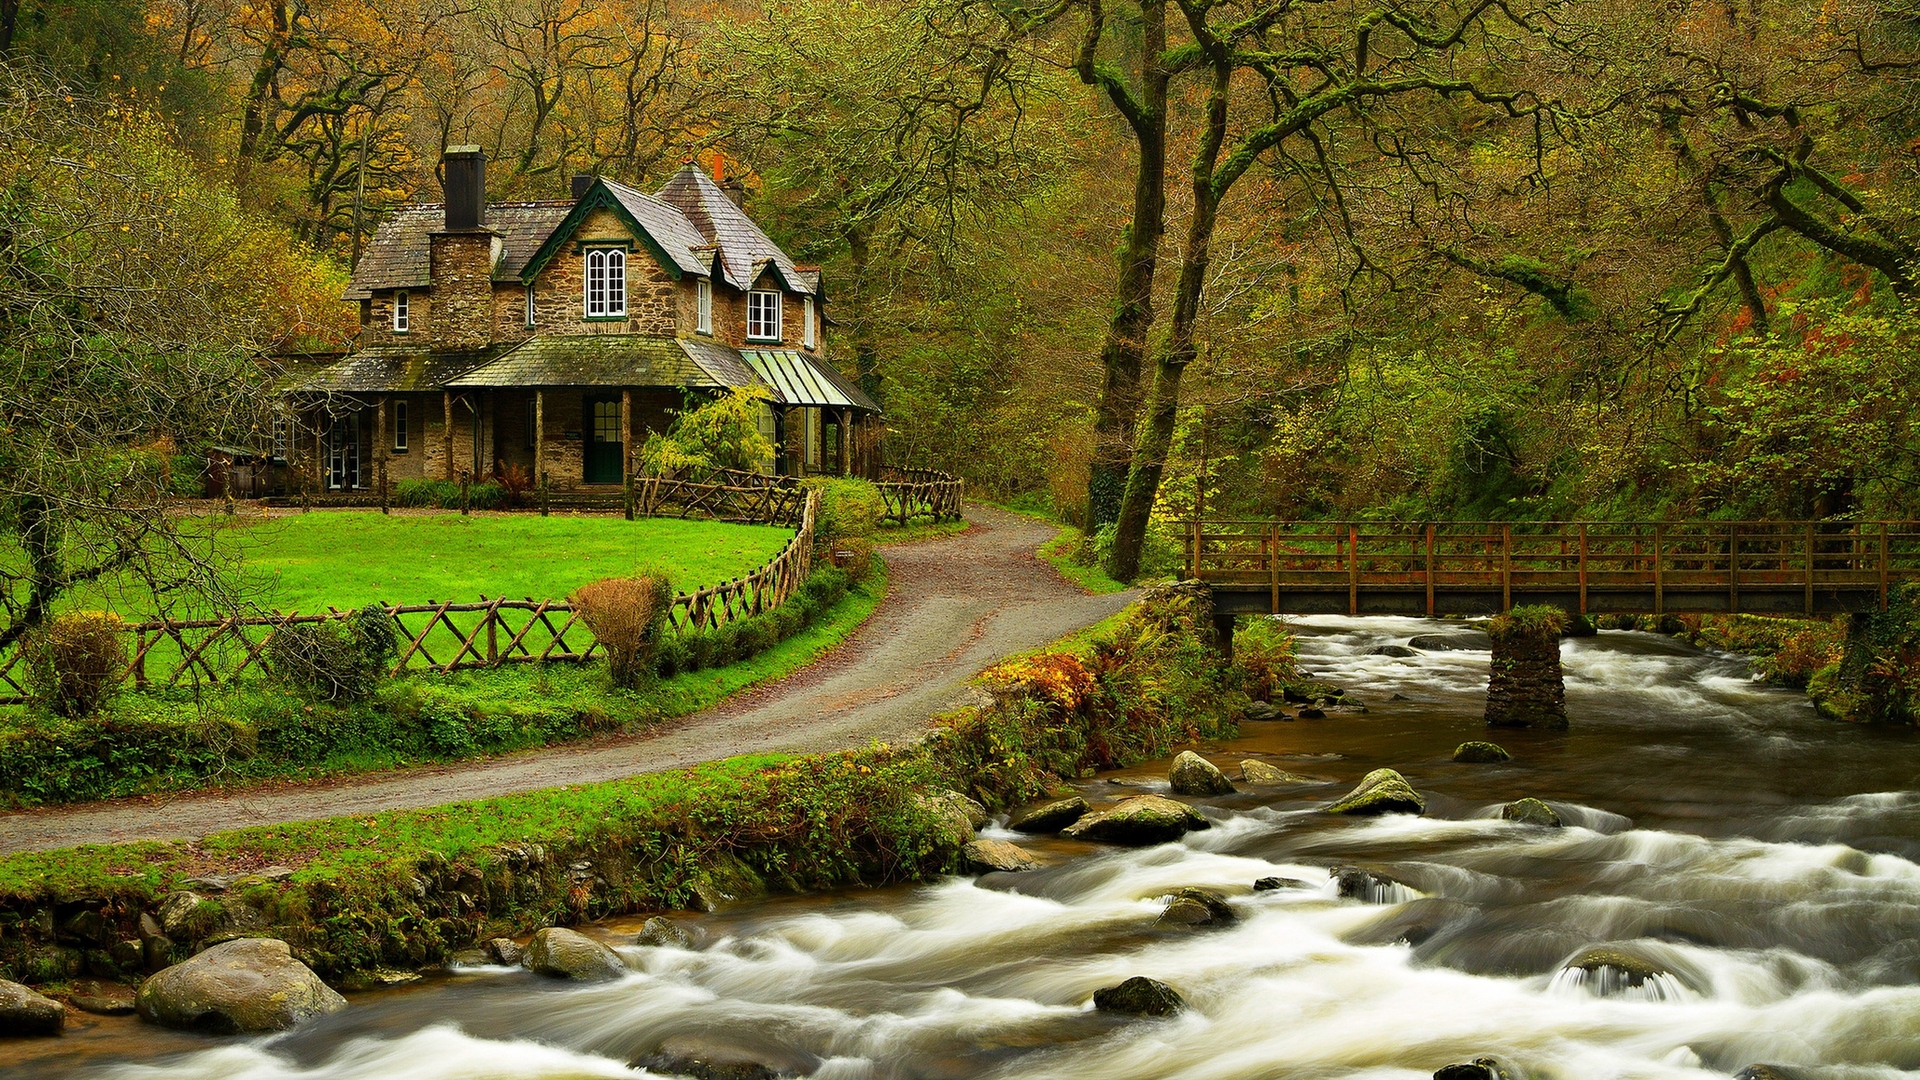 House in the Woods for 1920 x 1080 HDTV 1080p resolution